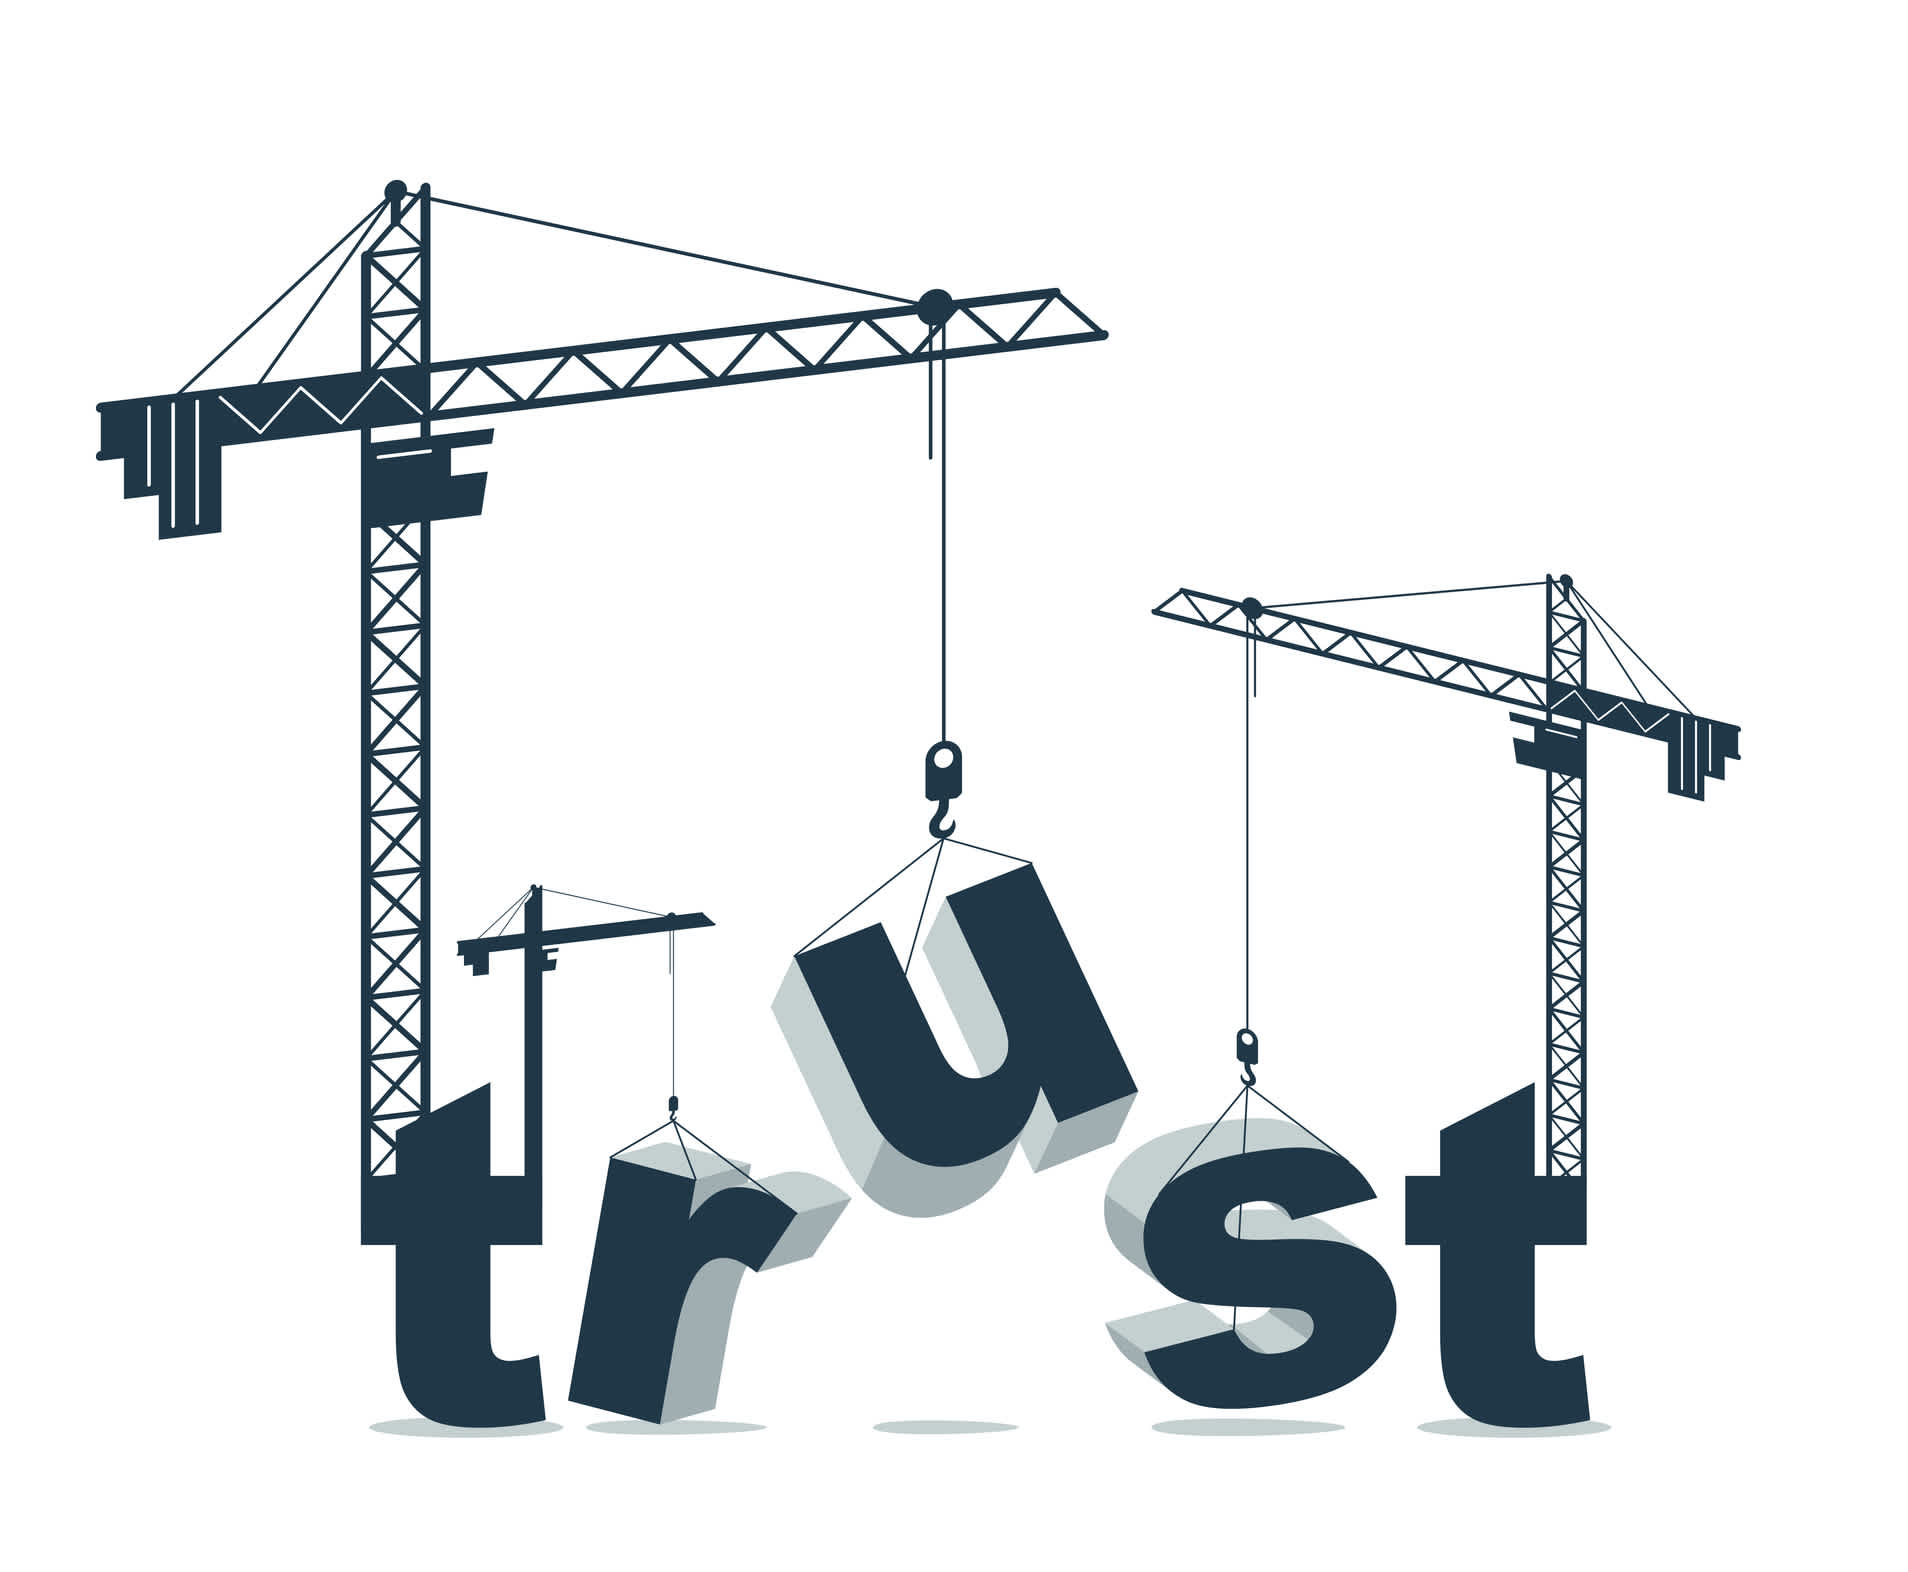 Construction cranes build Trust word vector concept design, conceptual illustration with lettering allegory in progress development, stylish metaphor of business or relations.| Watermark